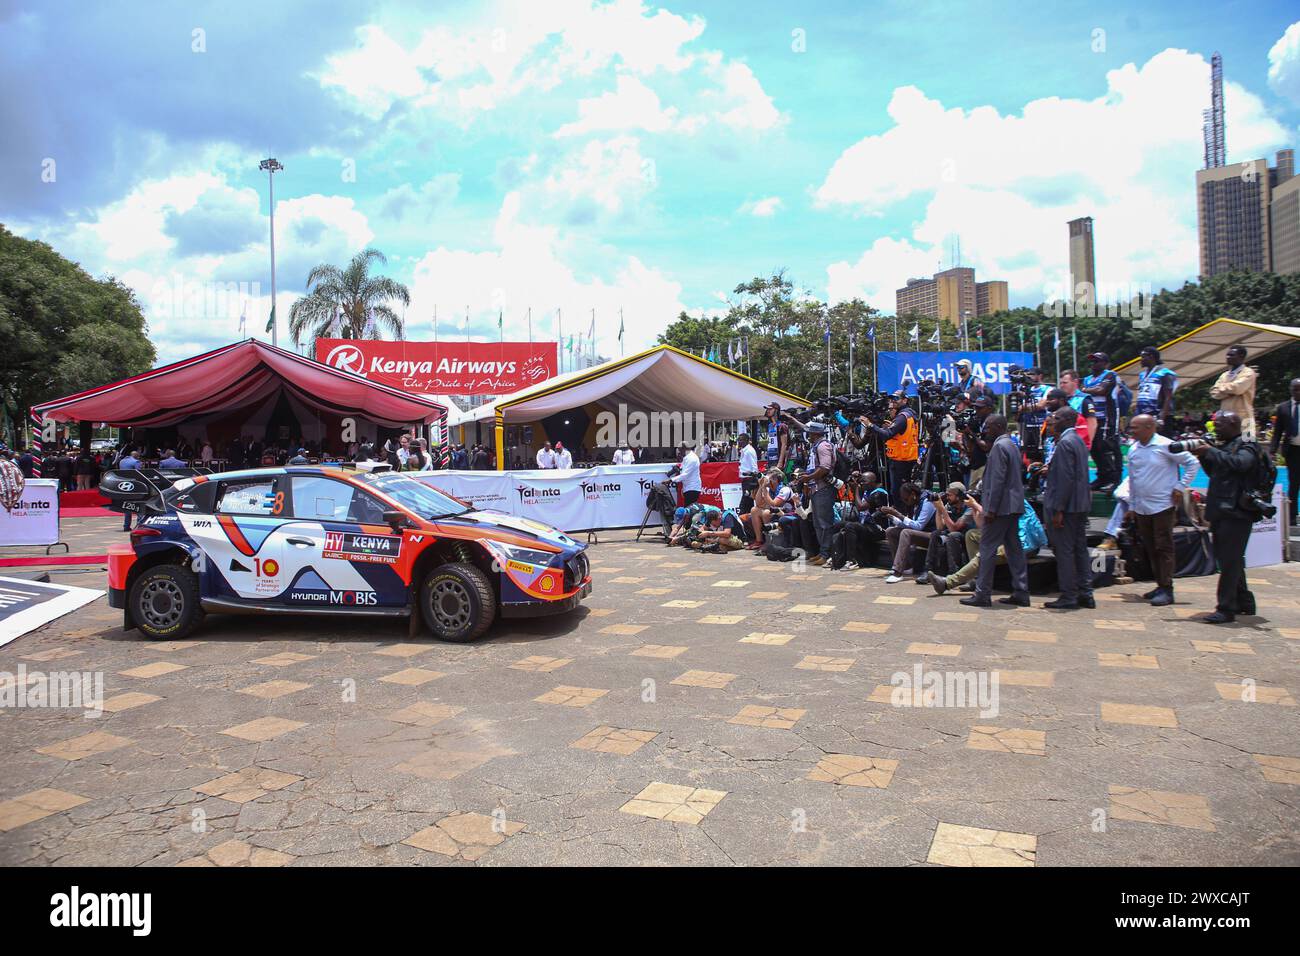 Local and international Photographers and Videographers document the official flagging off ceremony of the 2024 World Rally Championship (WRC) Safari Rally at the Kenyatta International Convention Center. His Excellency the President of Kenya, William Ruto, officially launched the 2024 WRC Safari Rally competition at the Kenyatta International Conventional Centre (KICC) in Nairobi. This is the 71st edition of the Safari Rally in Kenya, Nairobi the capital city. The event marks the third round of this year's FIA (Fédération Internationale de l'Automobile) World Rally Championship. President Rut Stock Photo